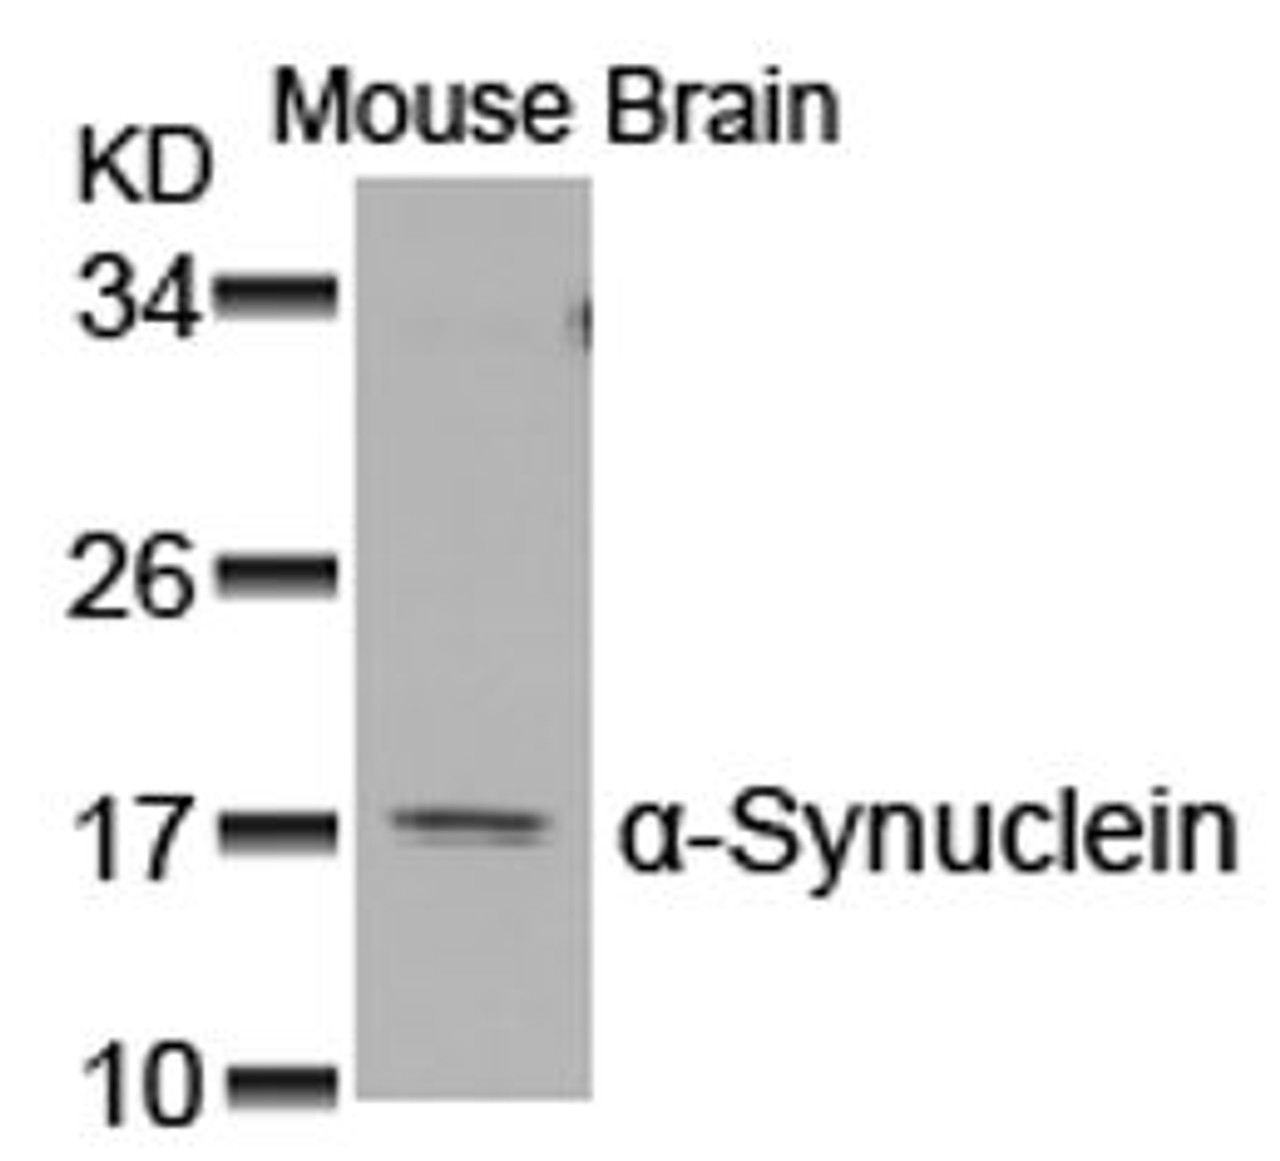 Western blot analysis of lysed extracts from Mouse Brain tissue using &#945;-Synuclein (Ab-129) .